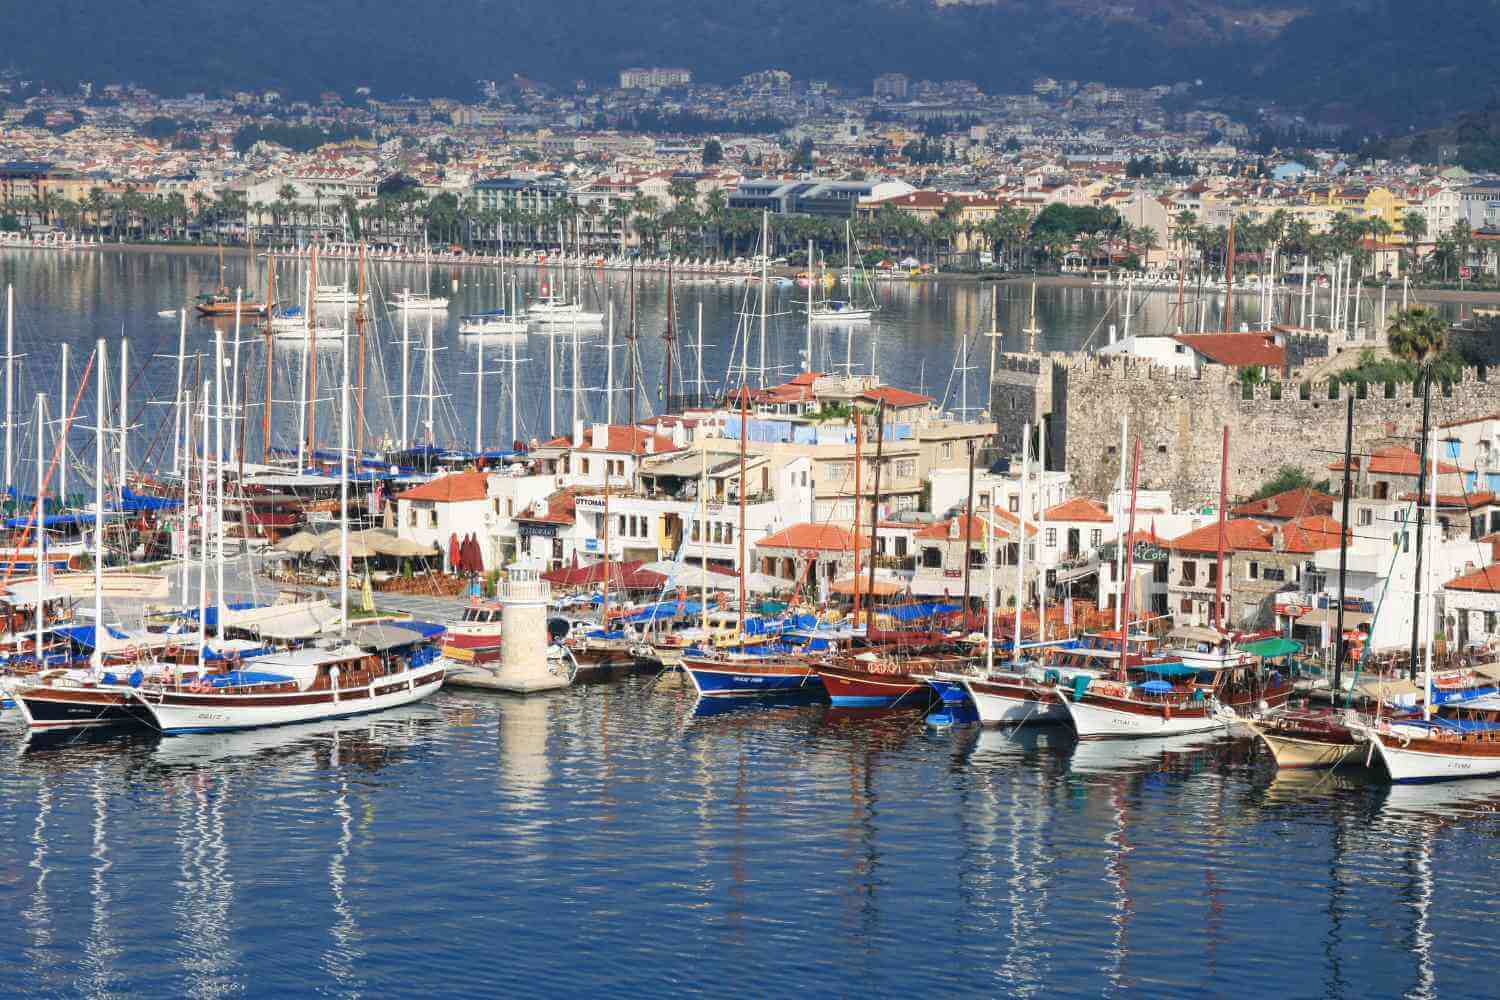 Marmaris harbour is a pleasant place, with lots of boats, nice walking promenade, cafes and restaurants